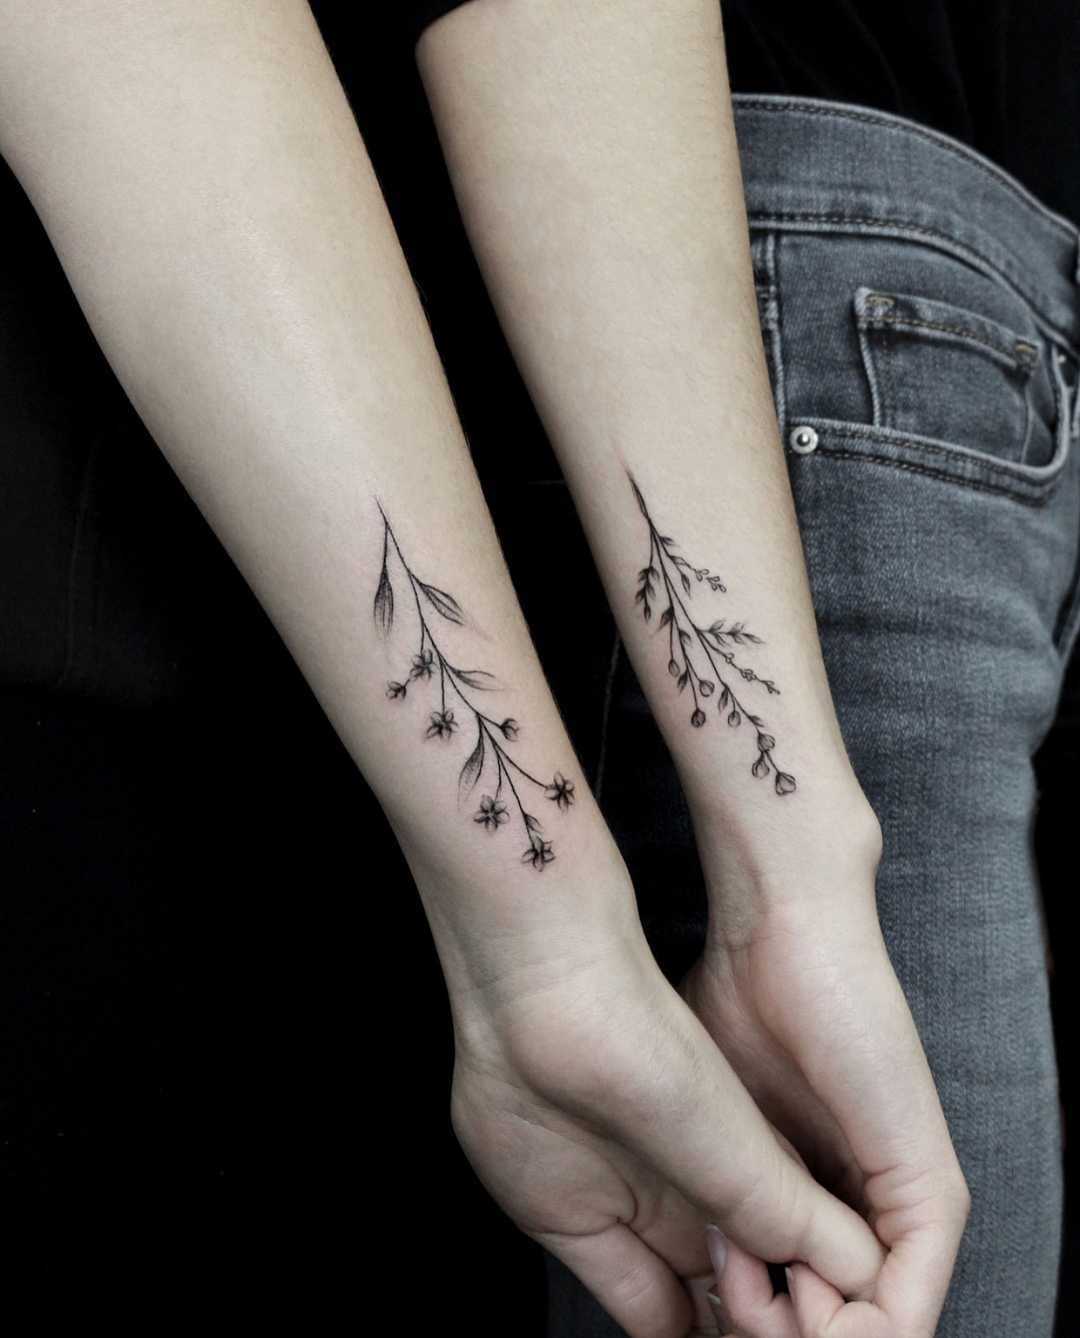 Matching flower tattoos on forearms 